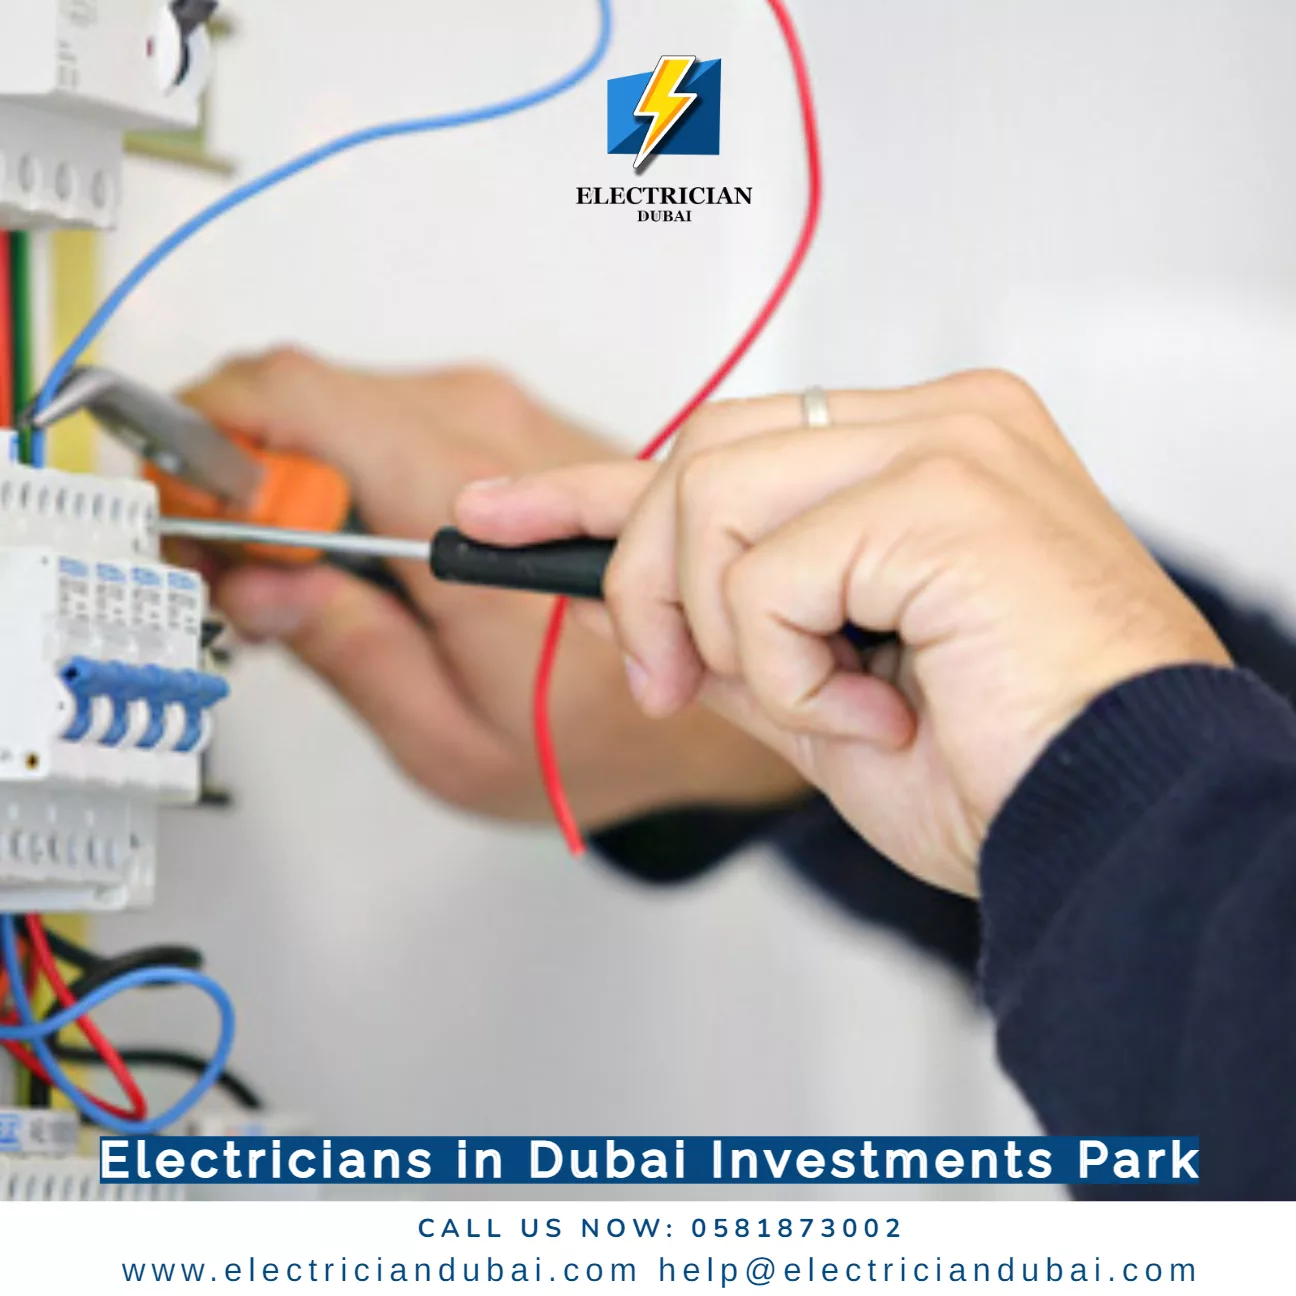 Electricians in Dubai Investments Park